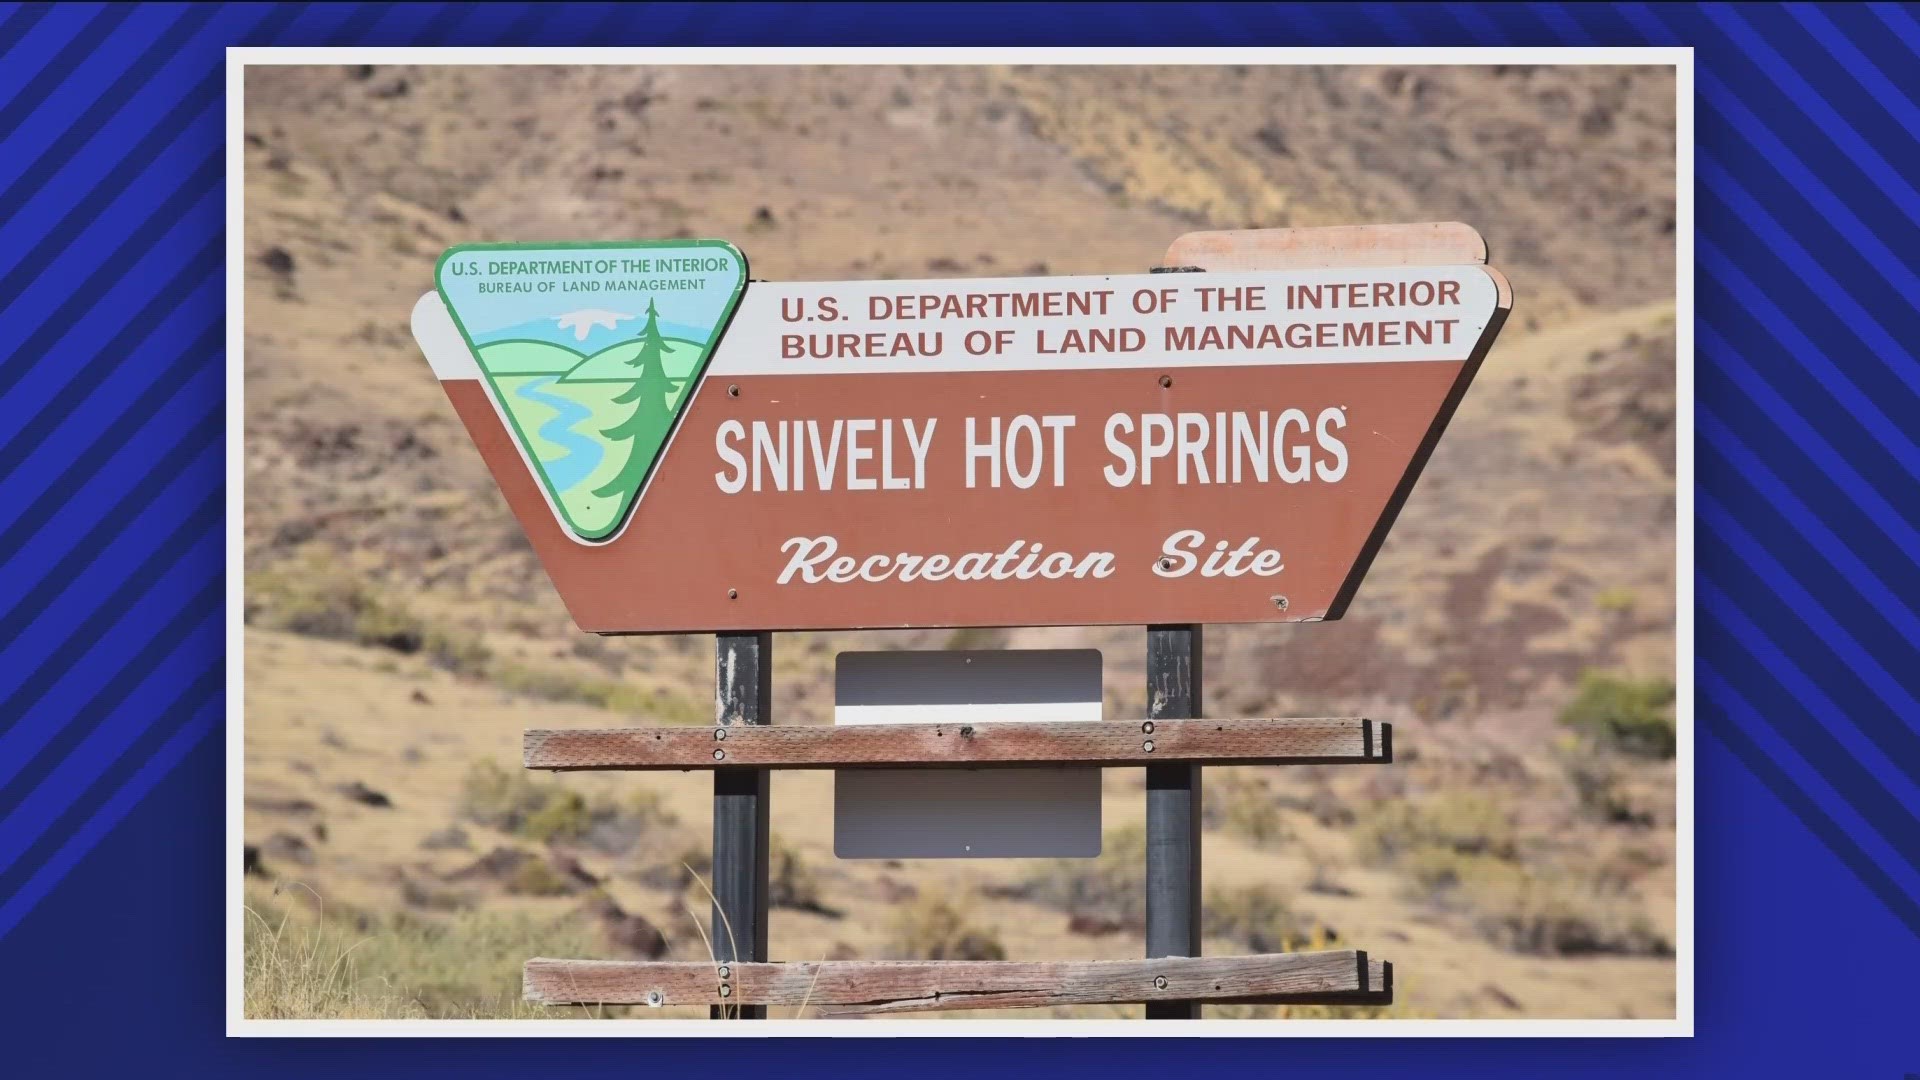 Due to violations and "criminal behavior," officials may enforce stricter rules at the popular Snively Hot Springs Recreation Site.